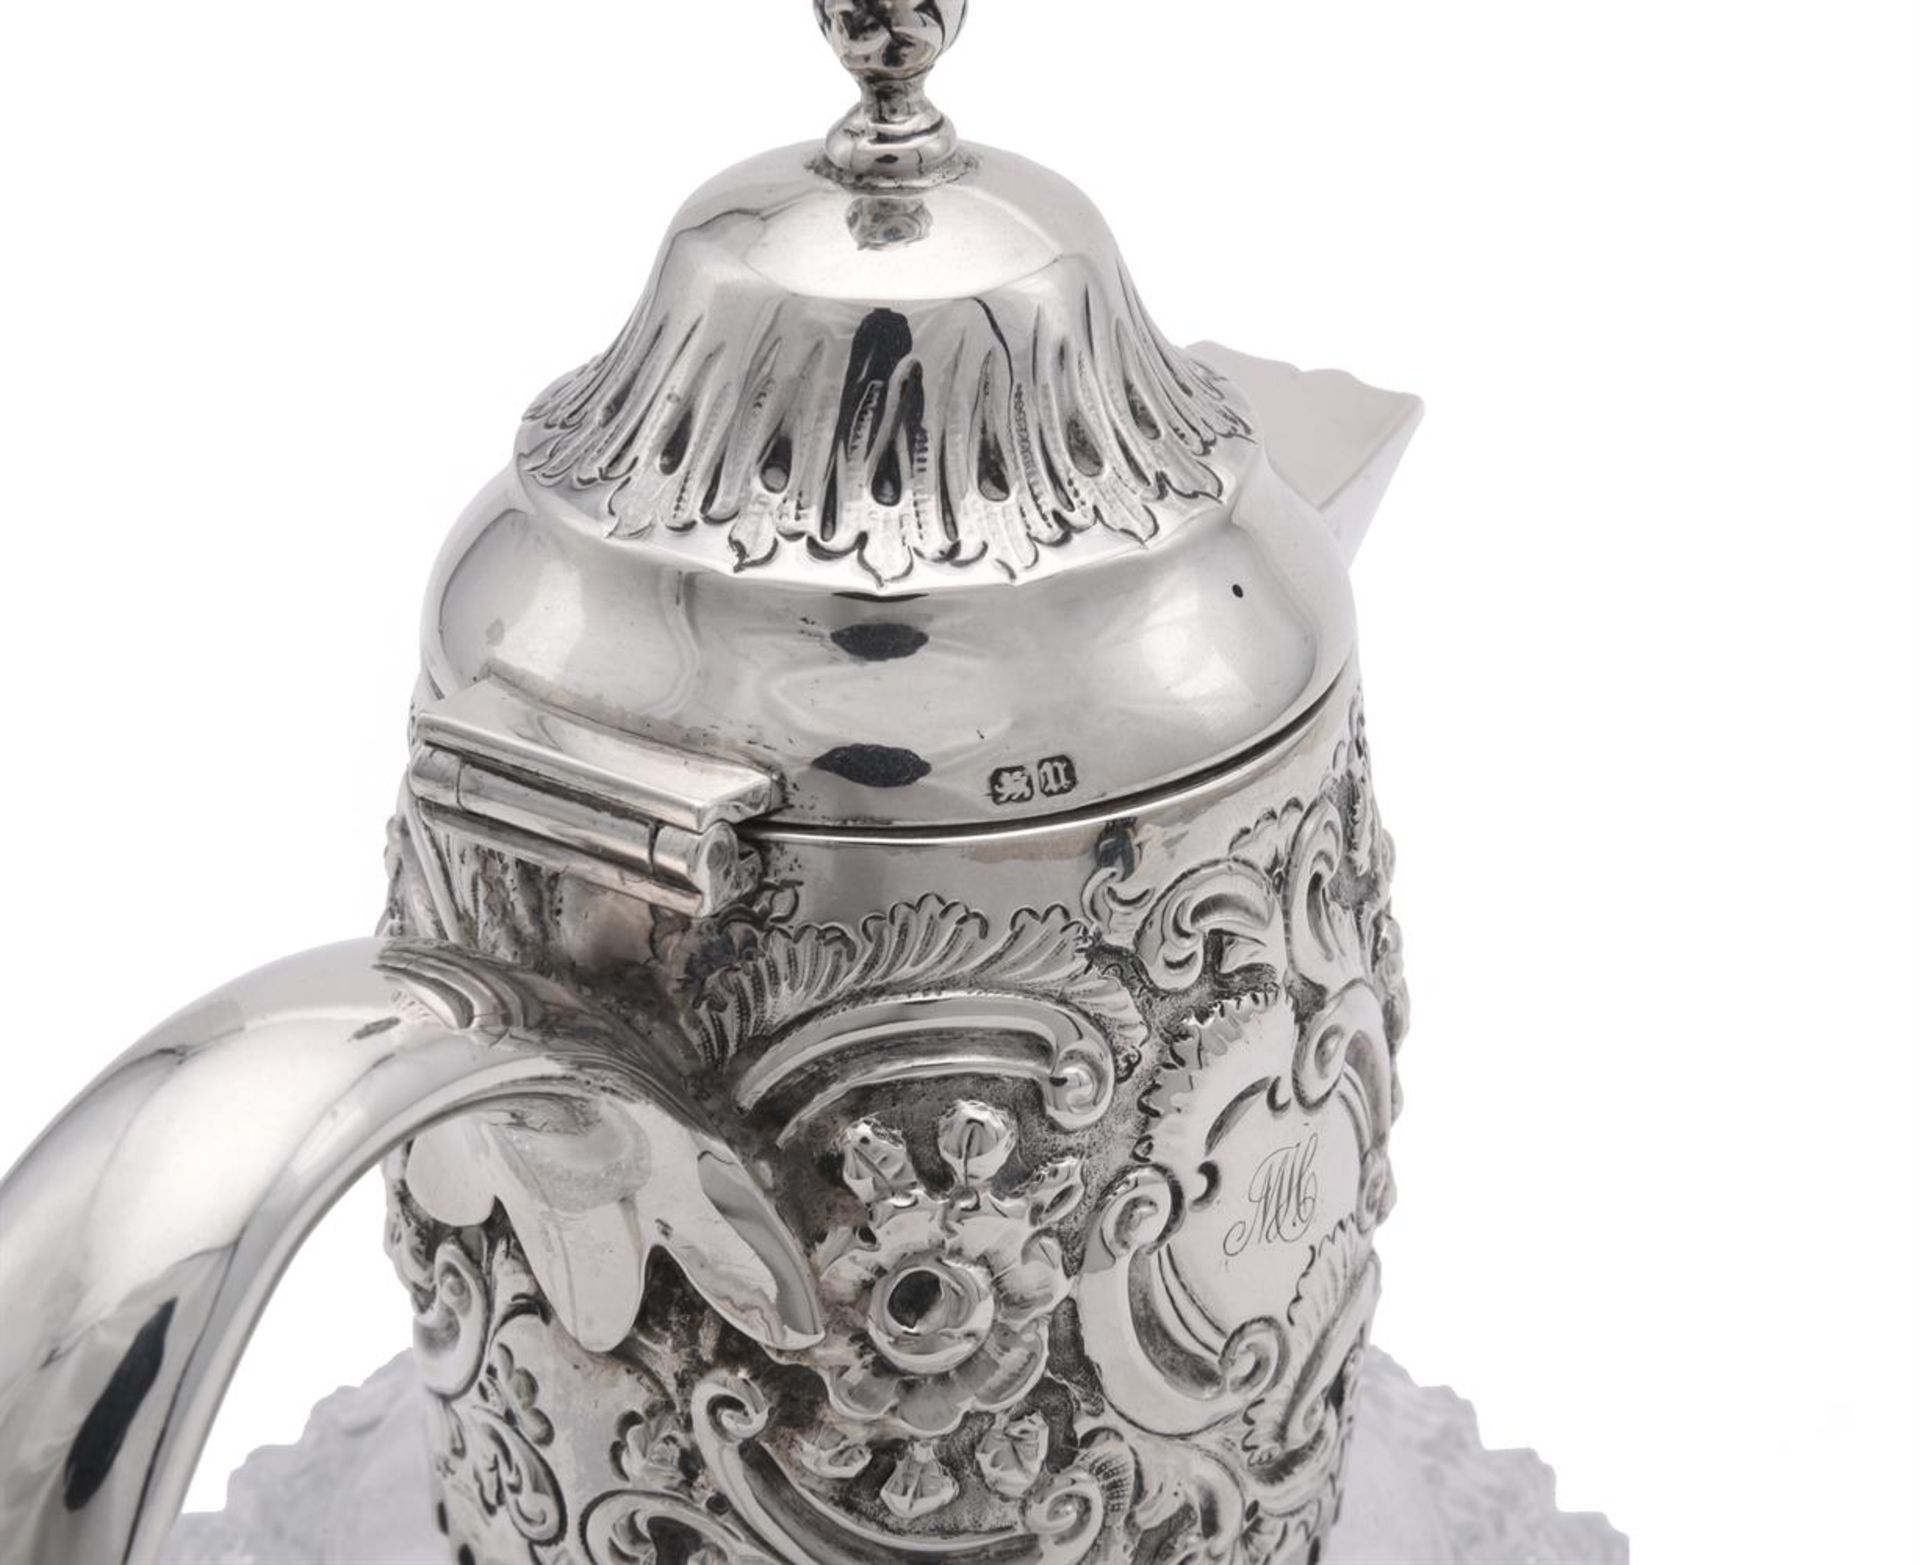 A VICTORIAN SILVER MOUNTED CUT GLASS CLARET JUG, PLANTE & CO. - Image 2 of 2